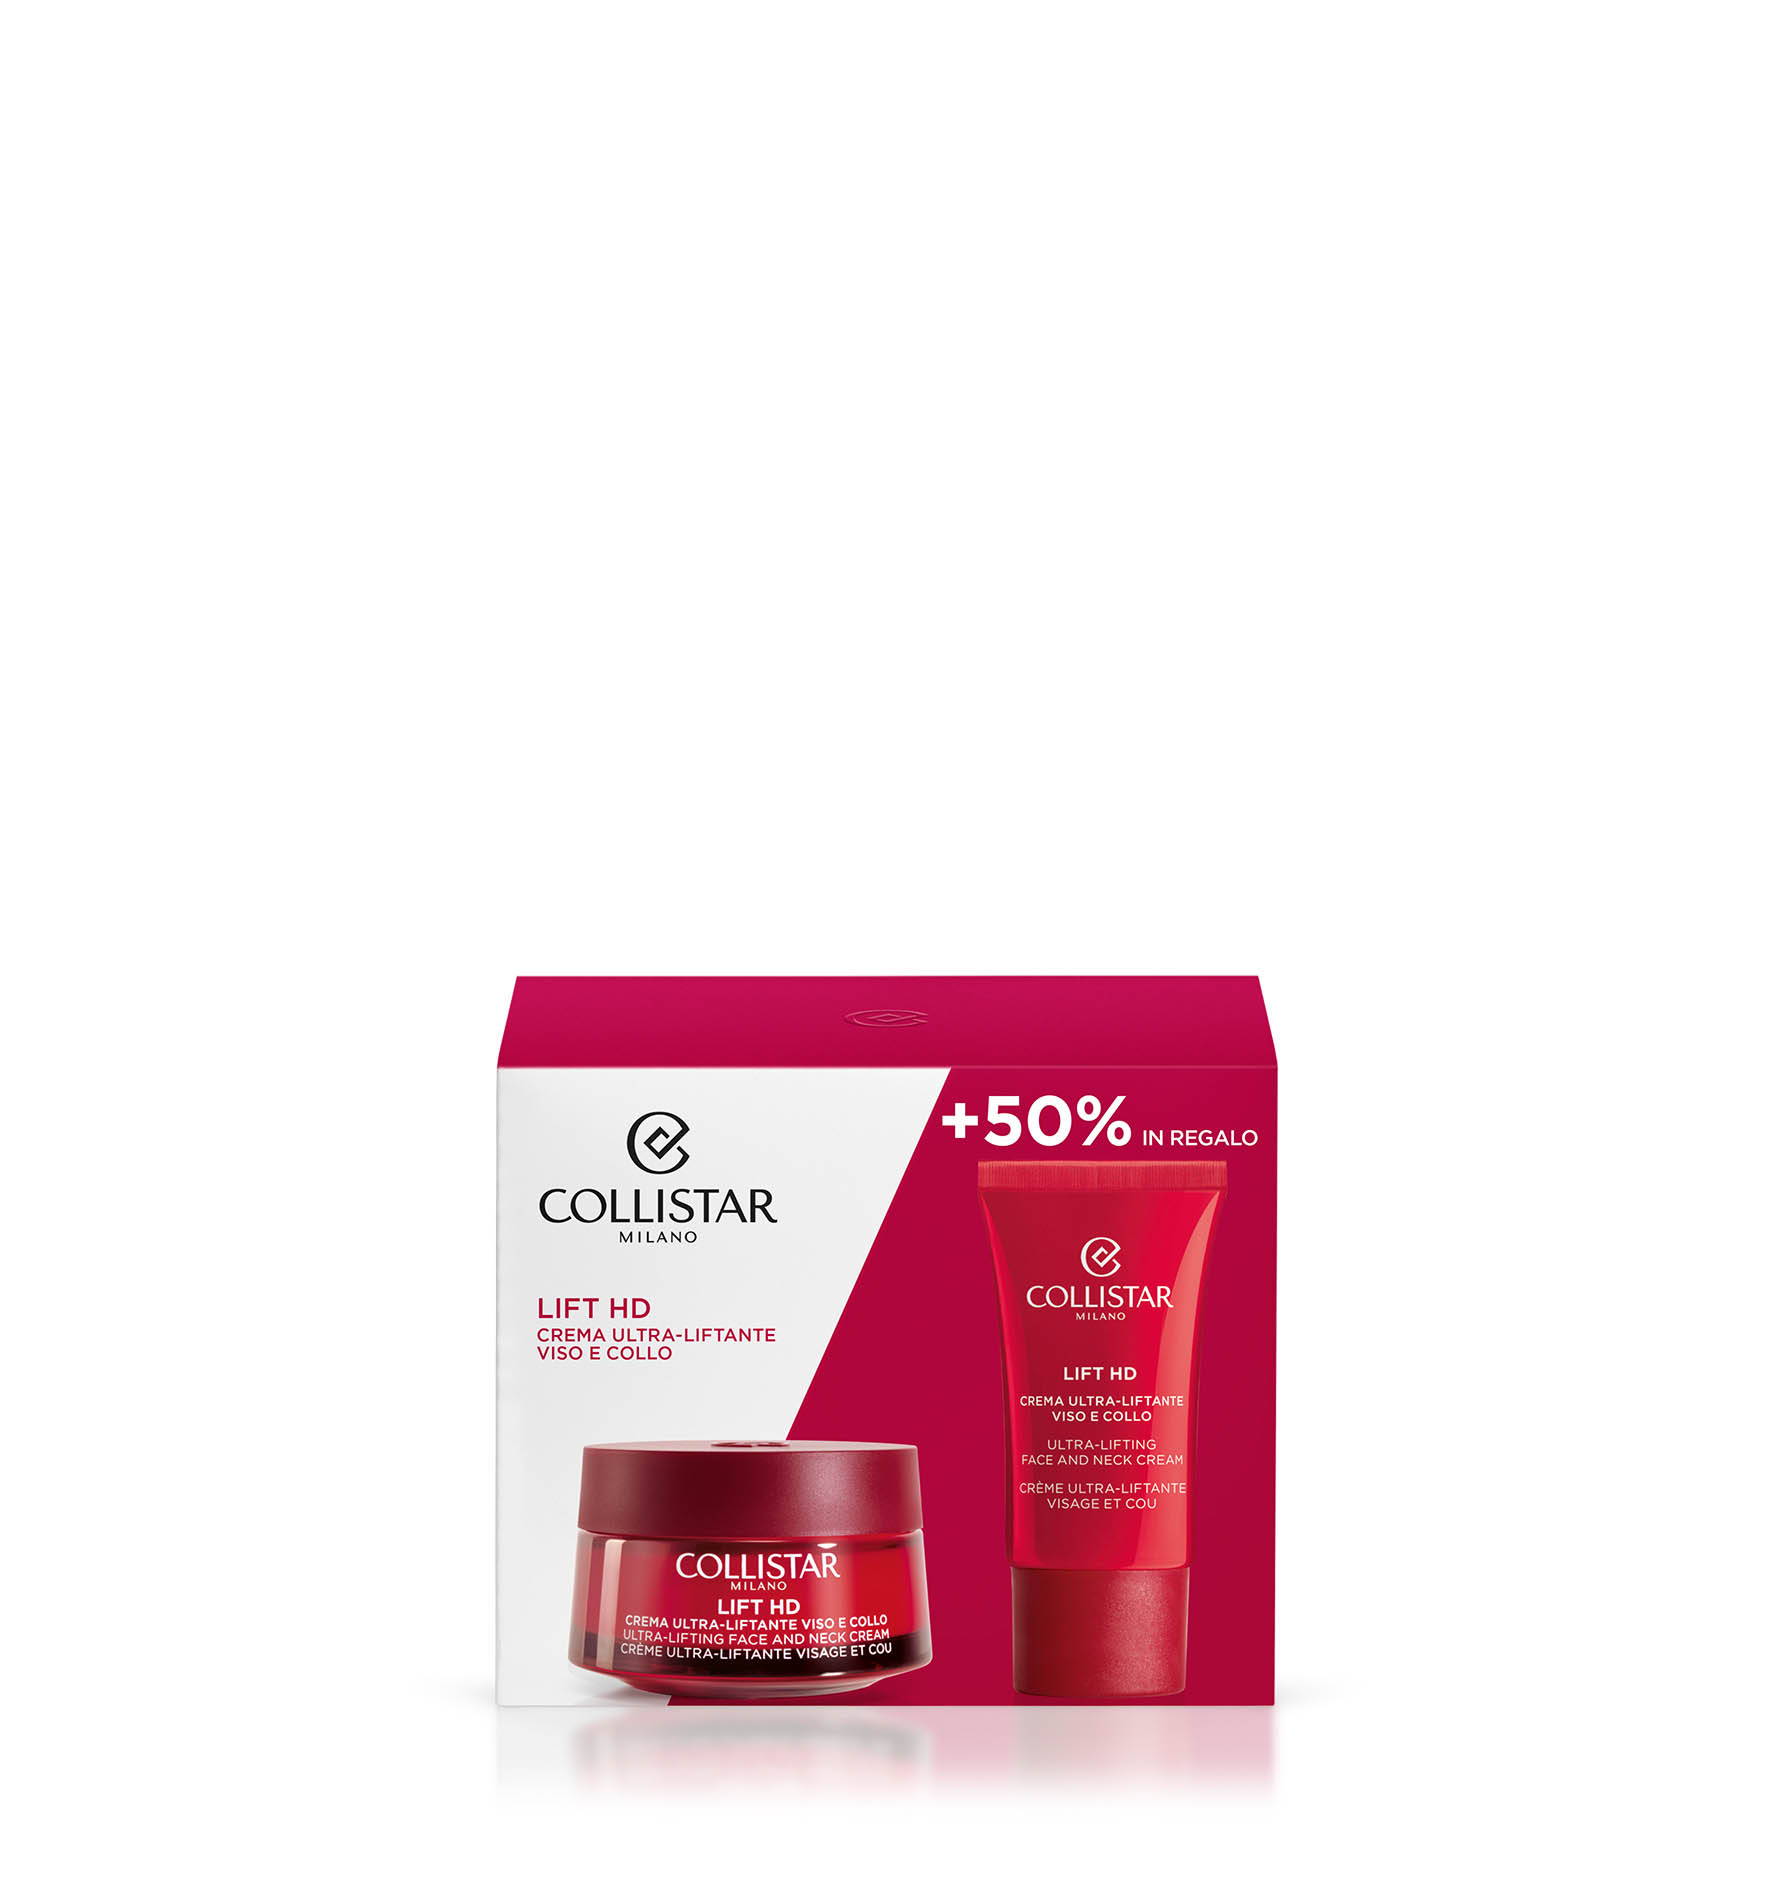 LIFT HD ULTRA-LIFTING FACE AND NECK CREAM 50 ml SET - Anti-age | Collistar - Shop Online Ufficiale